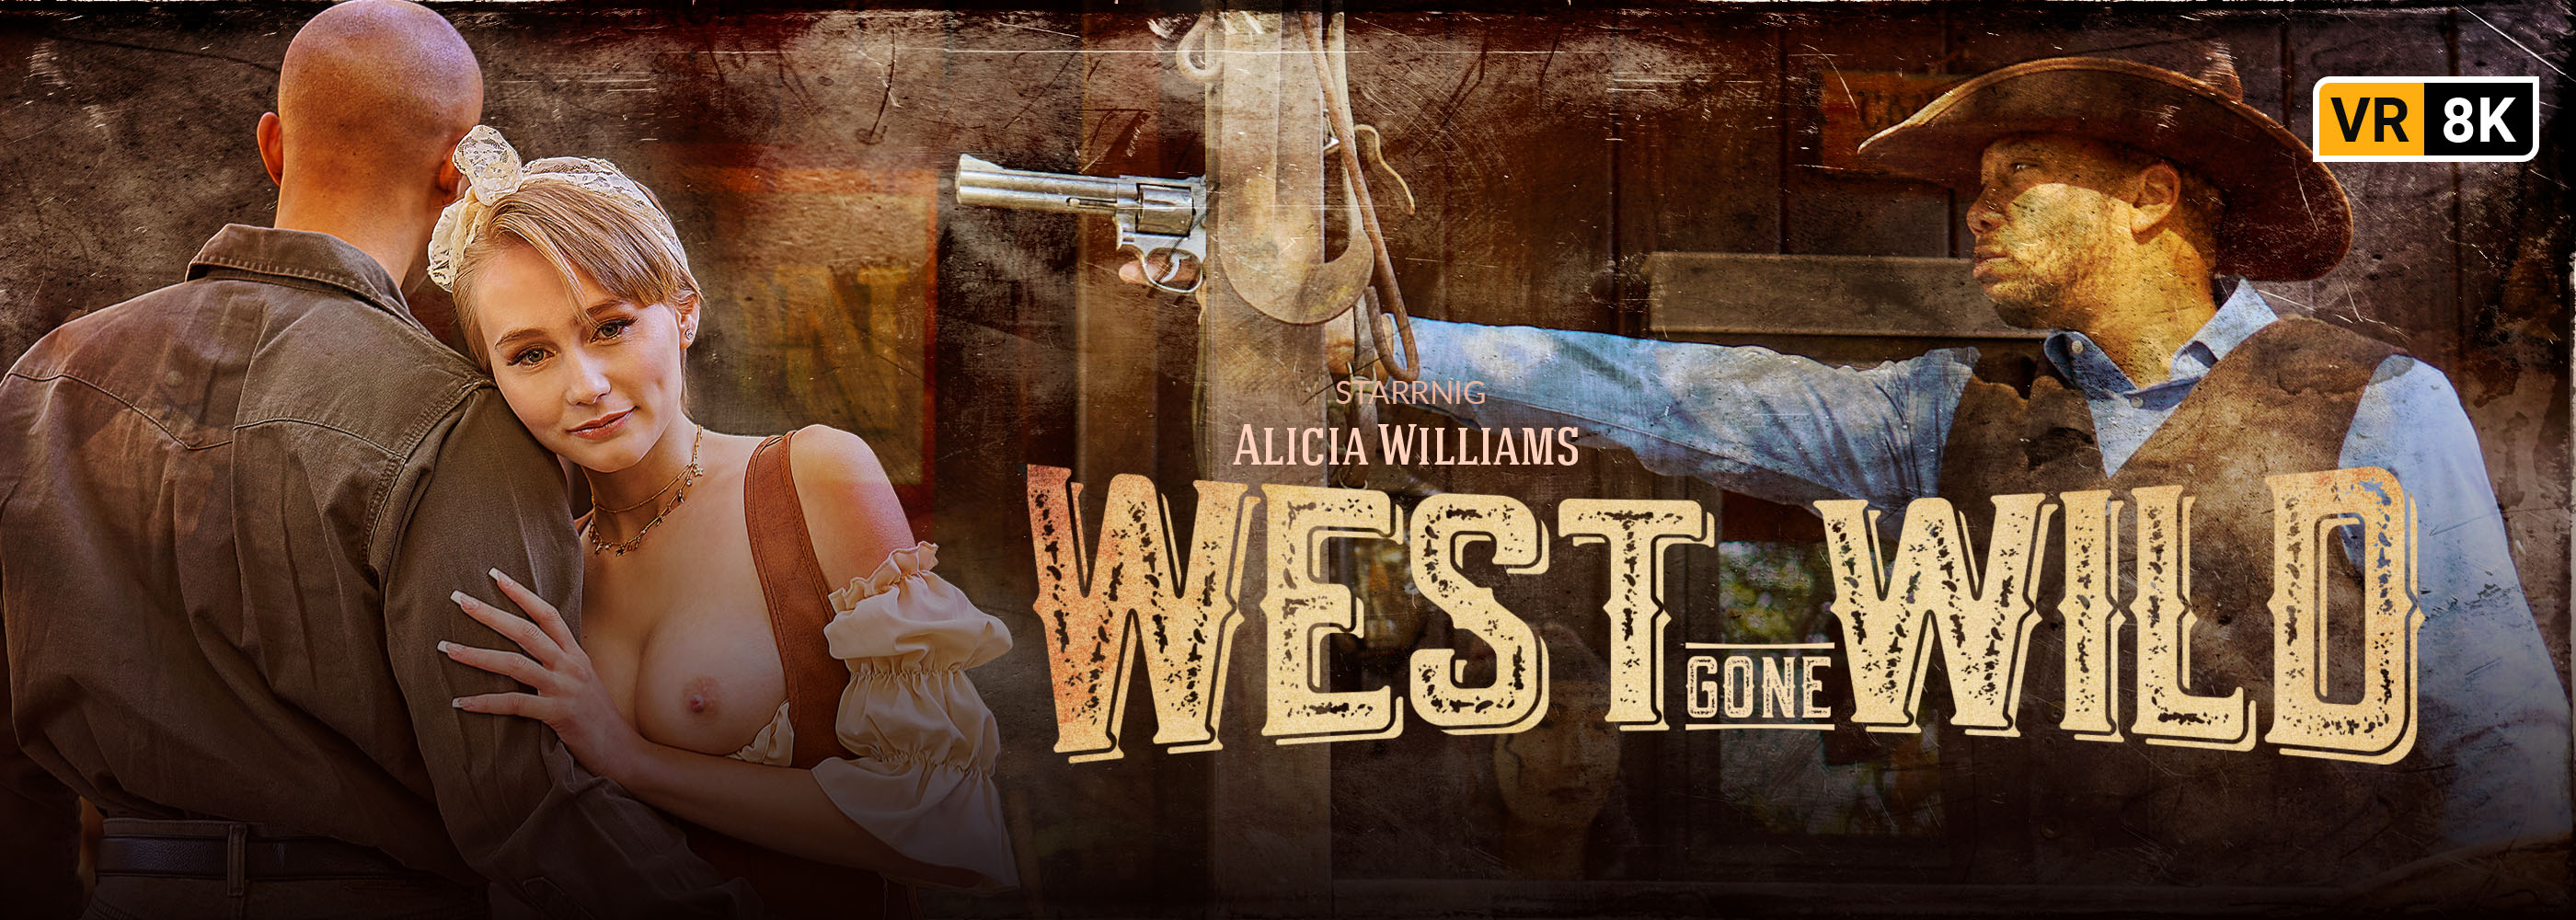 West Gone Wild - VR Video, Starring: Alicia Williams